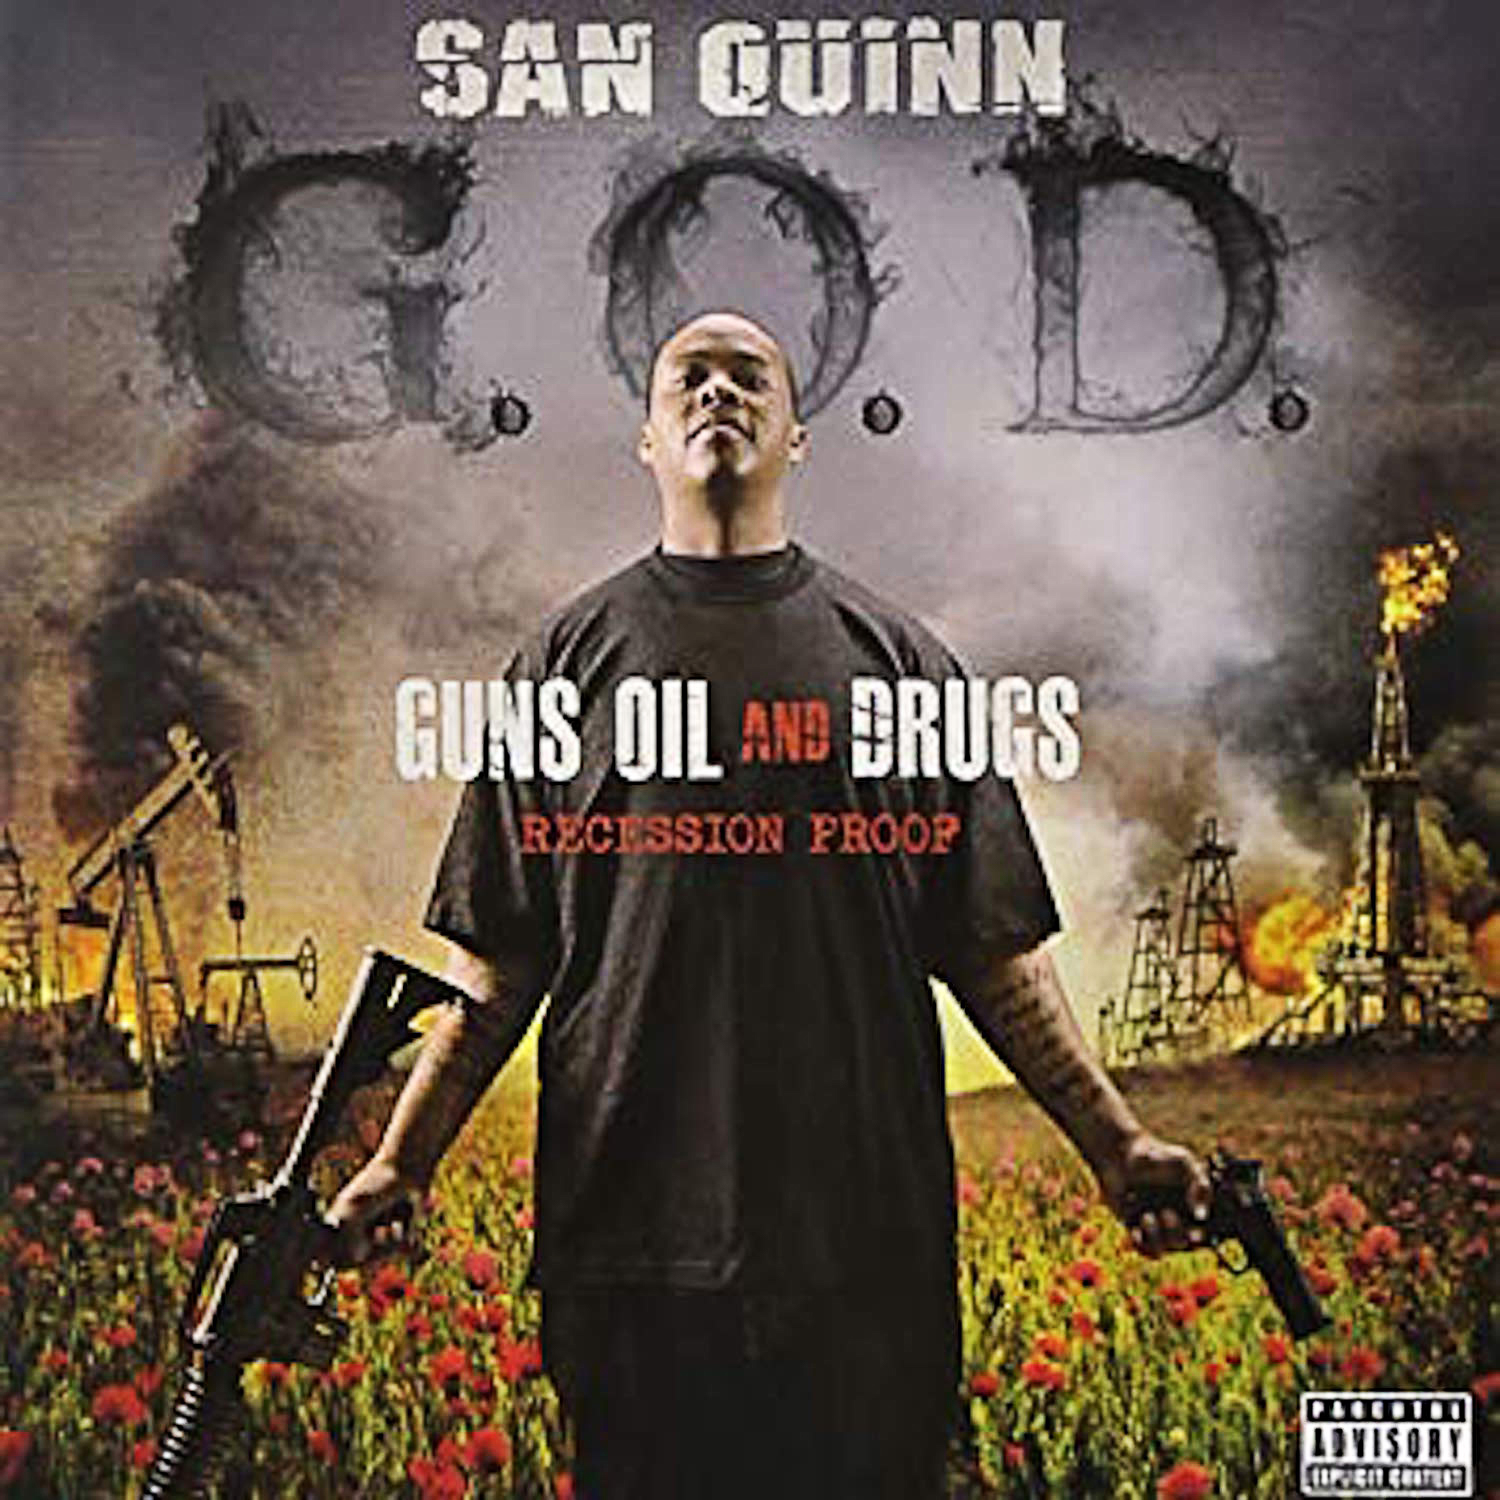 G.O.D.: Guns Oil and Drugs Recession Proof